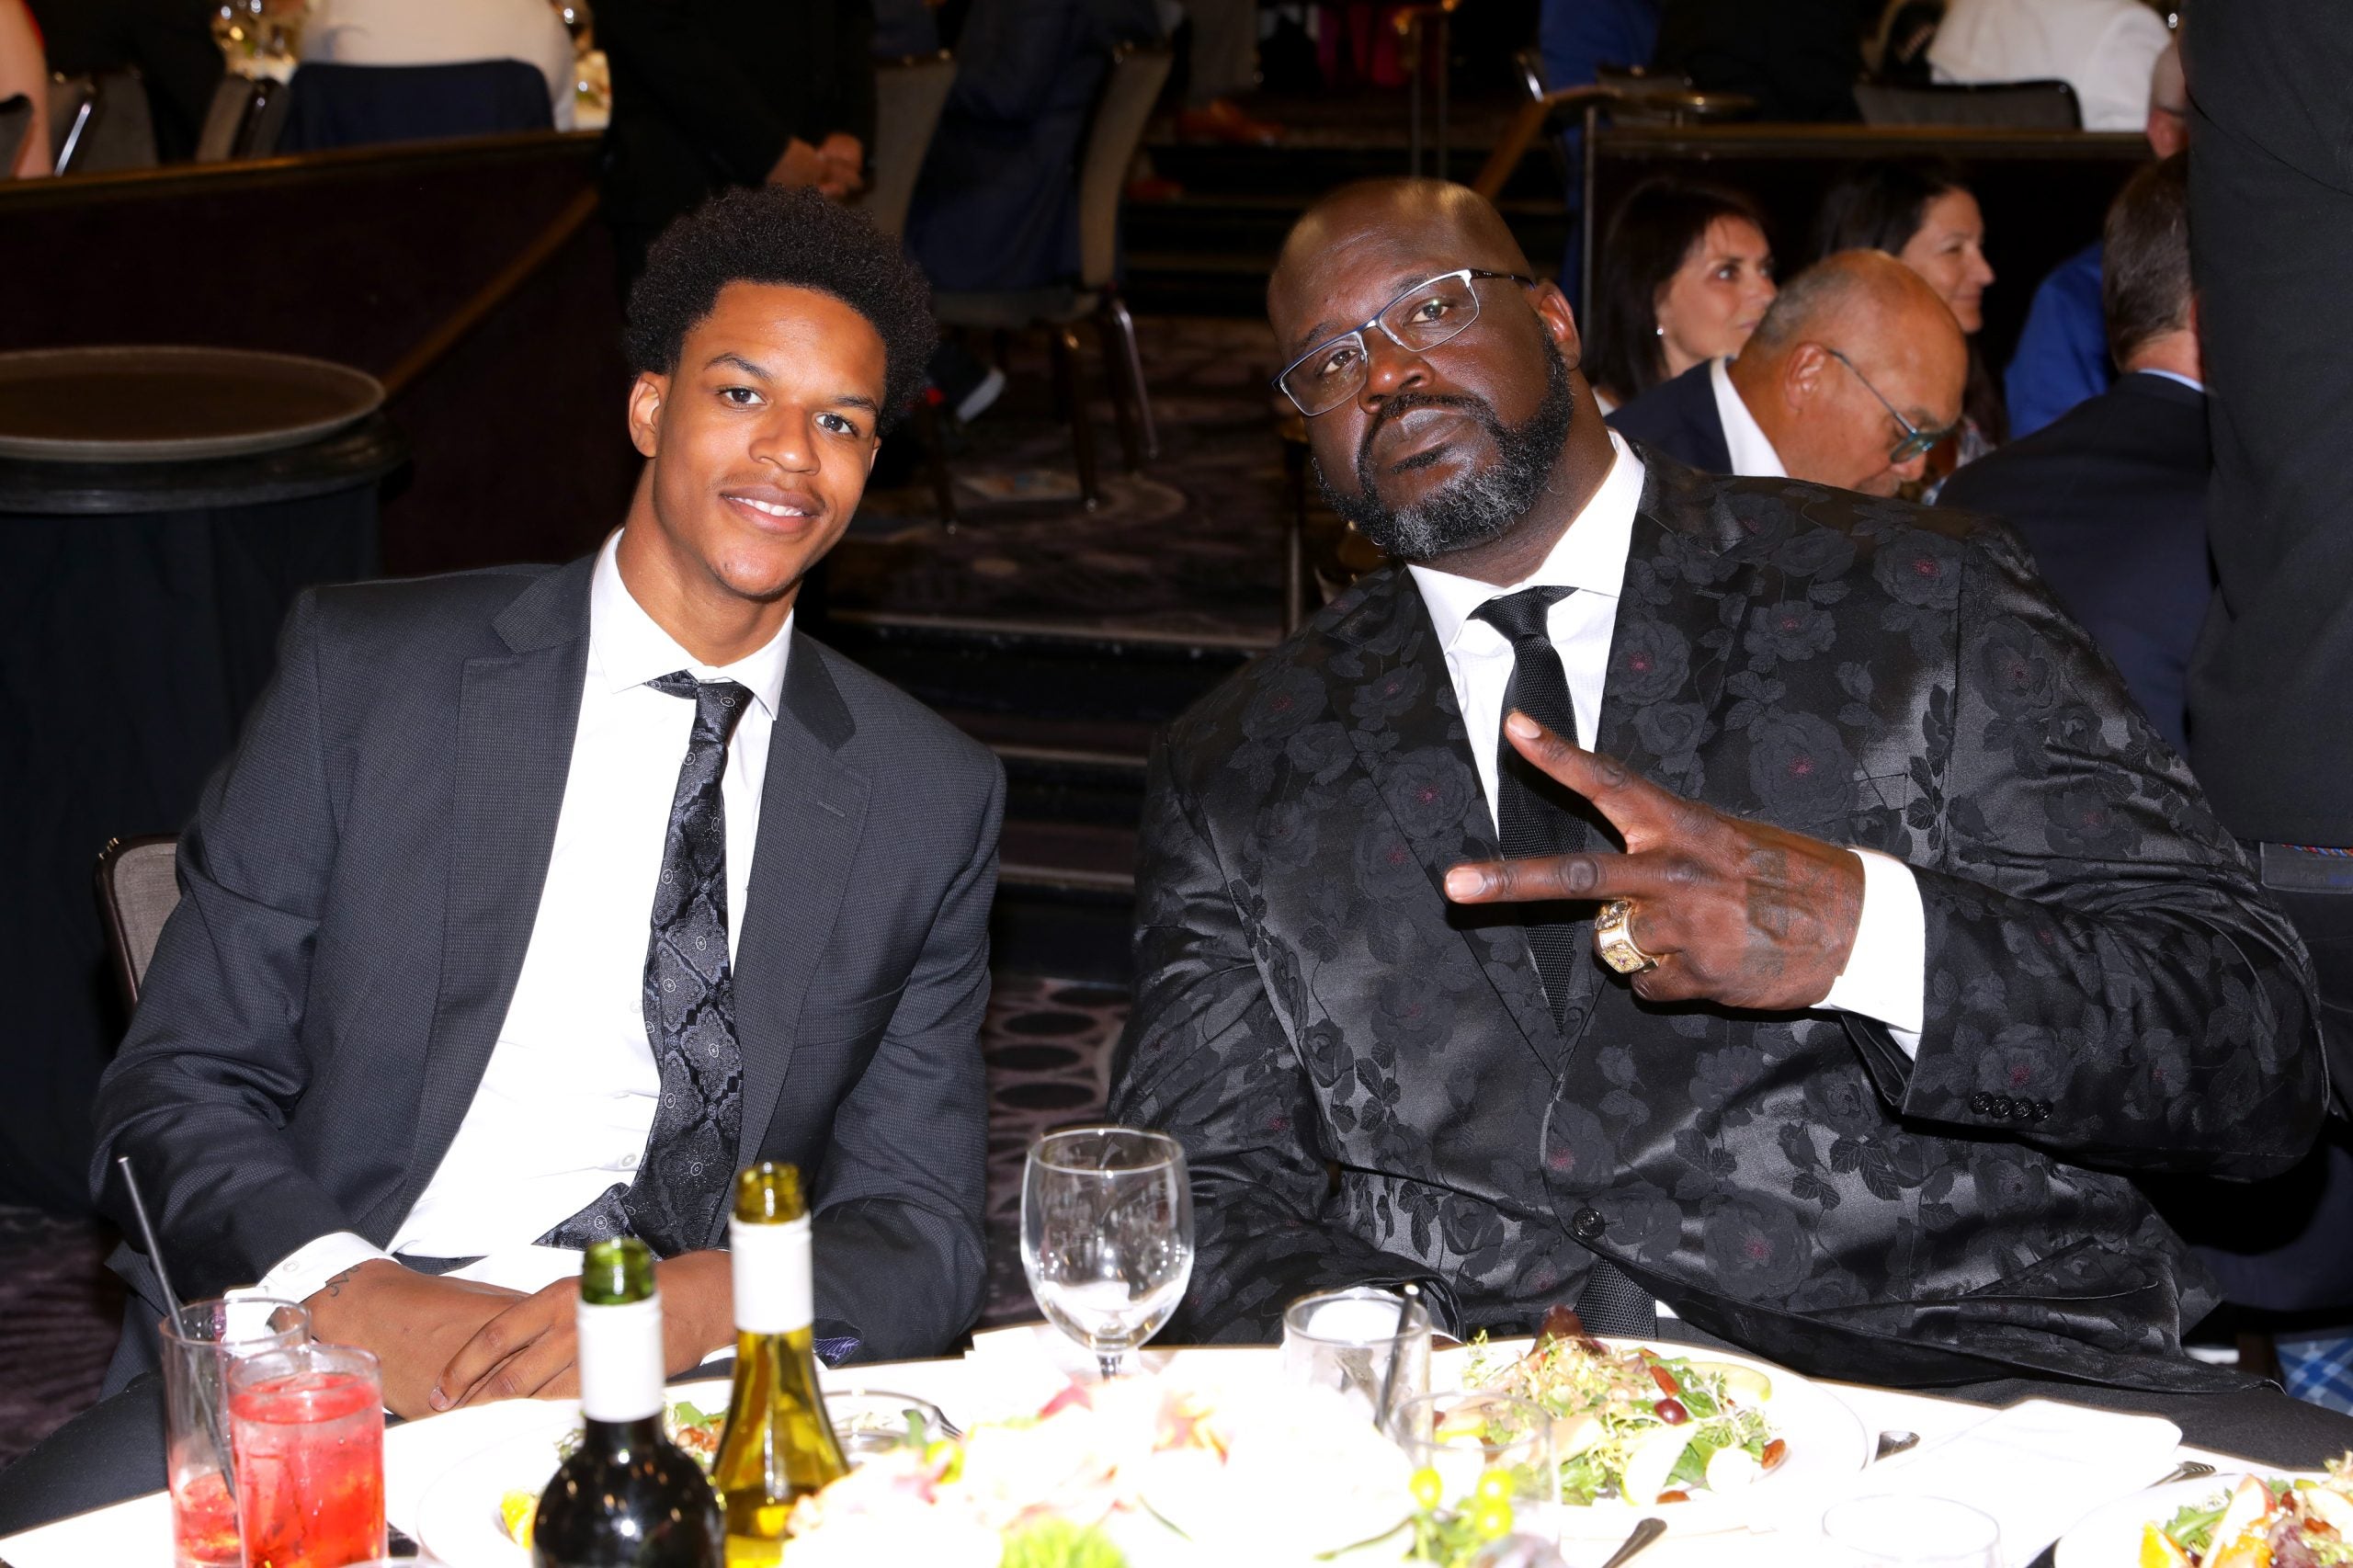 No One Knew Shareef O'Neal's Dad Was Shaq Growing Up: 'We Just Kind Of Hid It So People Didn't Treat Us Differently'